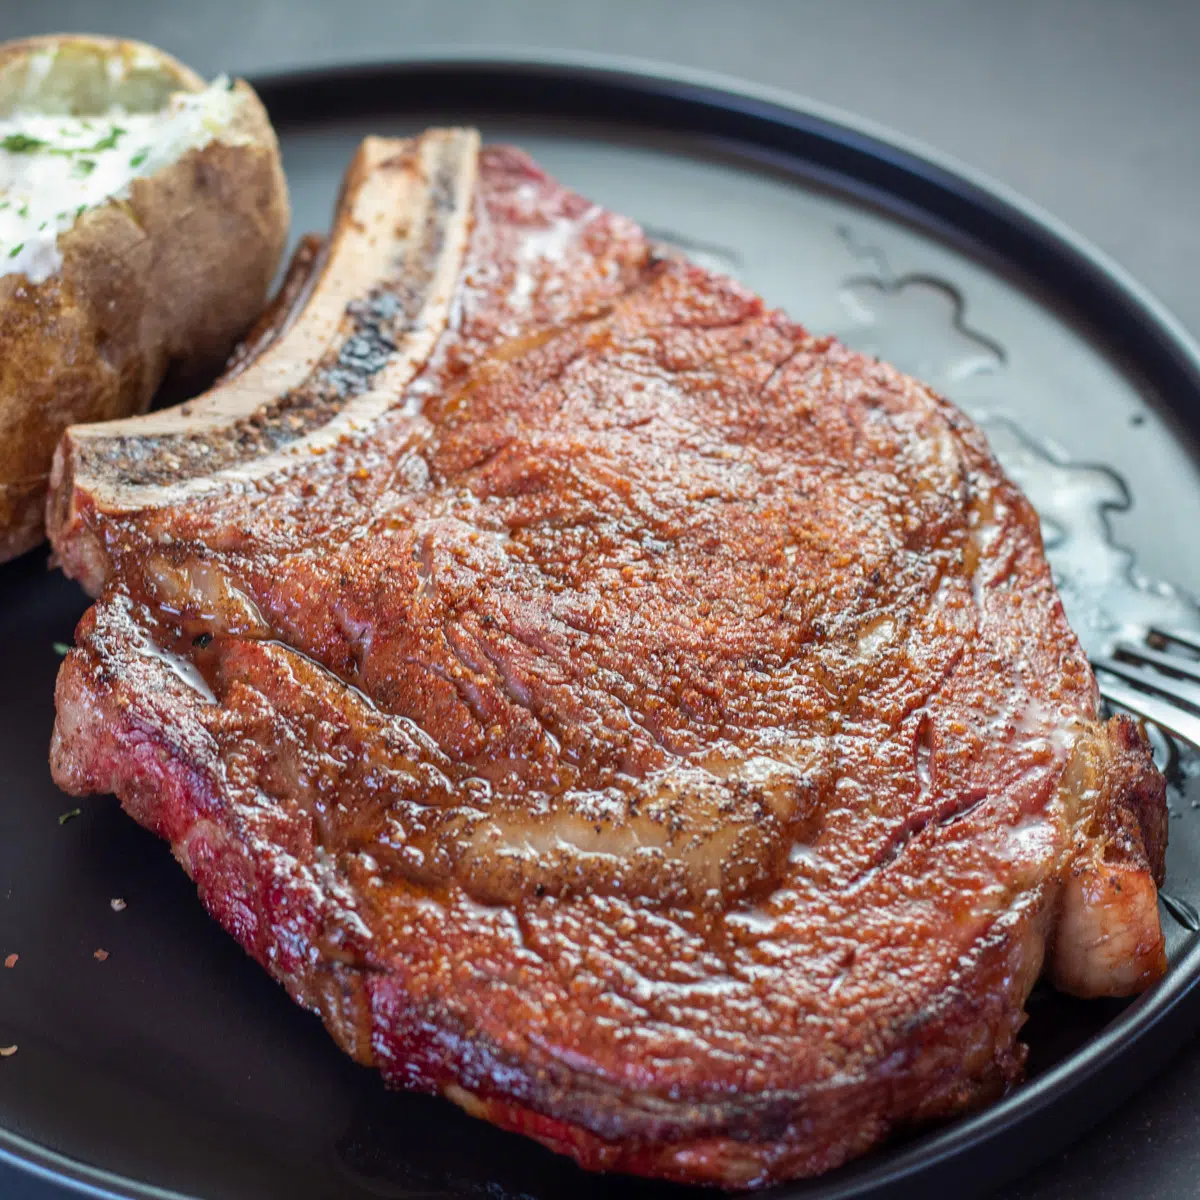 Flavorful, perfectly smoked ribeye steak on black plate with potato.